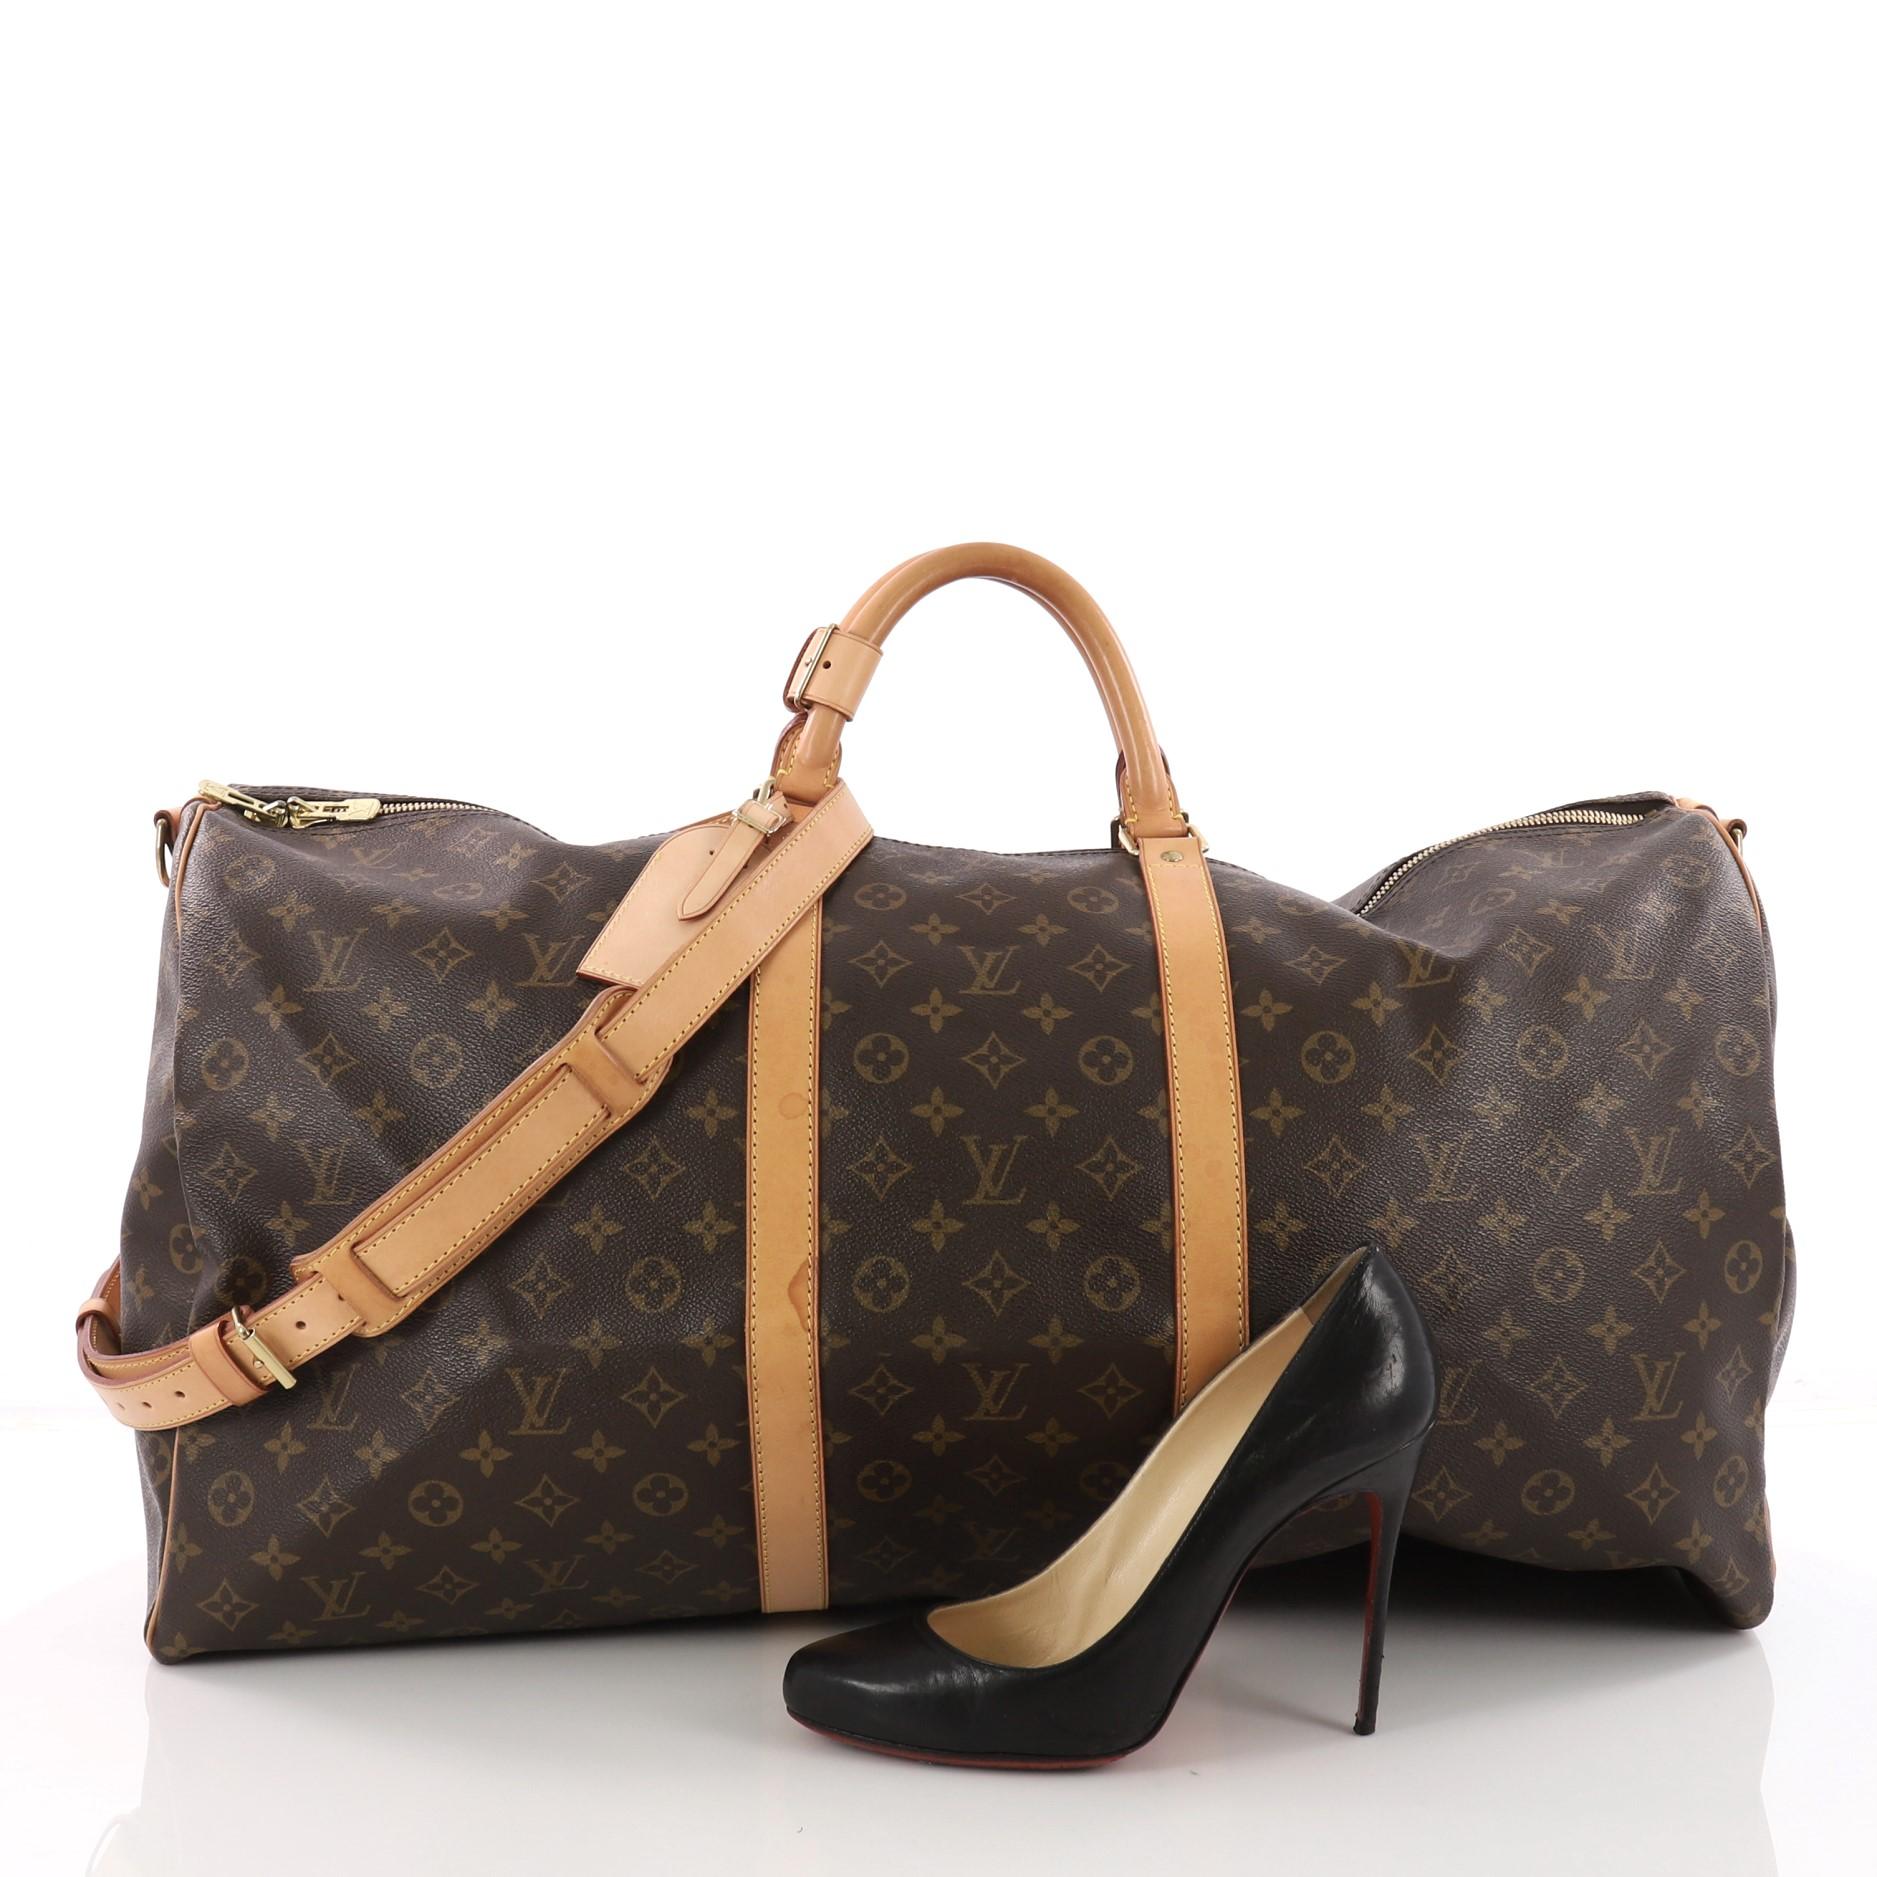 This Louis Vuitton Keepall Bandouliere Bag Monogram Canvas 60, crafted with brown monogram coated canvas, features dual-rolled handles, natural cowhide leather trims and gold-tone hardware accents. Its top zip closure opens to a brown fabric